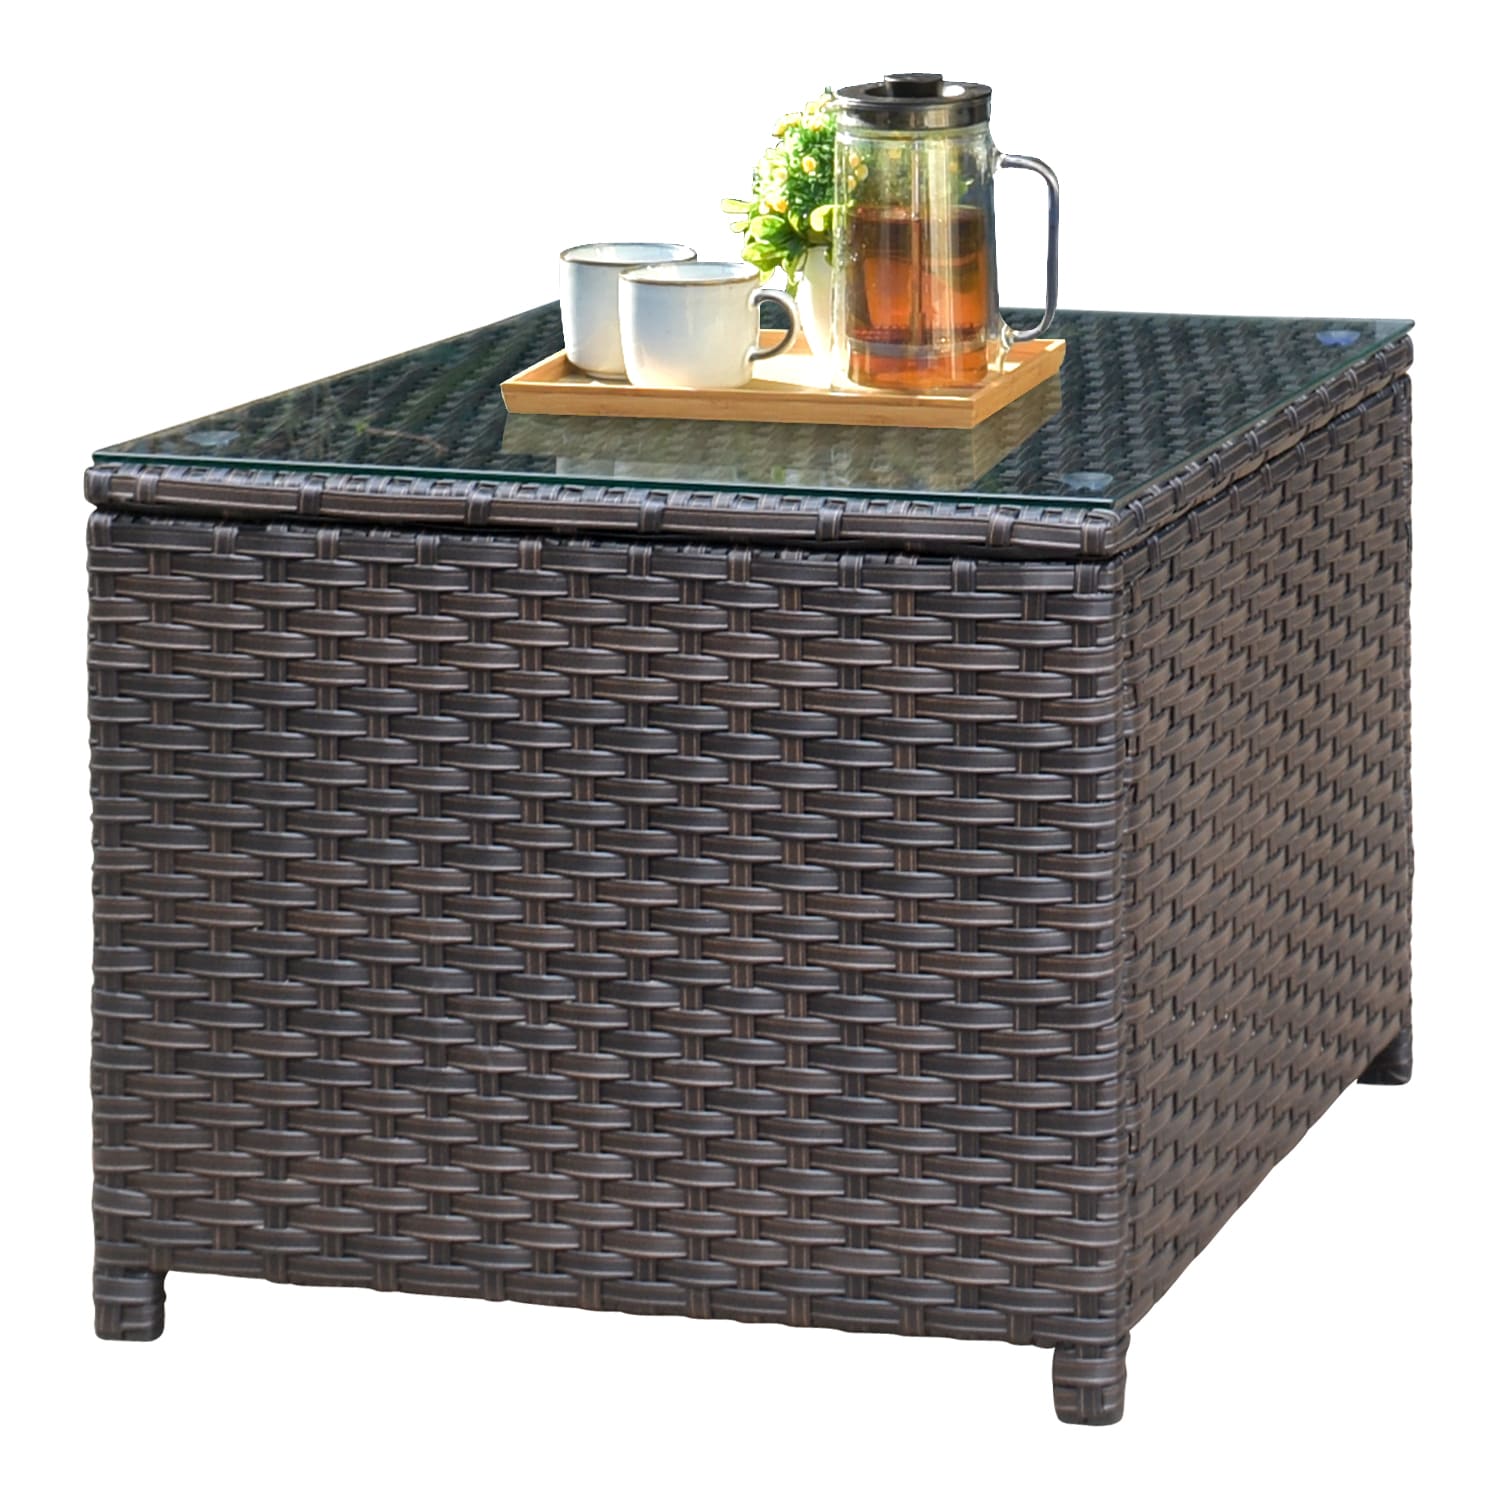 Outdoor Square Wicker Rattan Coffee Table End Side Table Patio Furniture Storage 